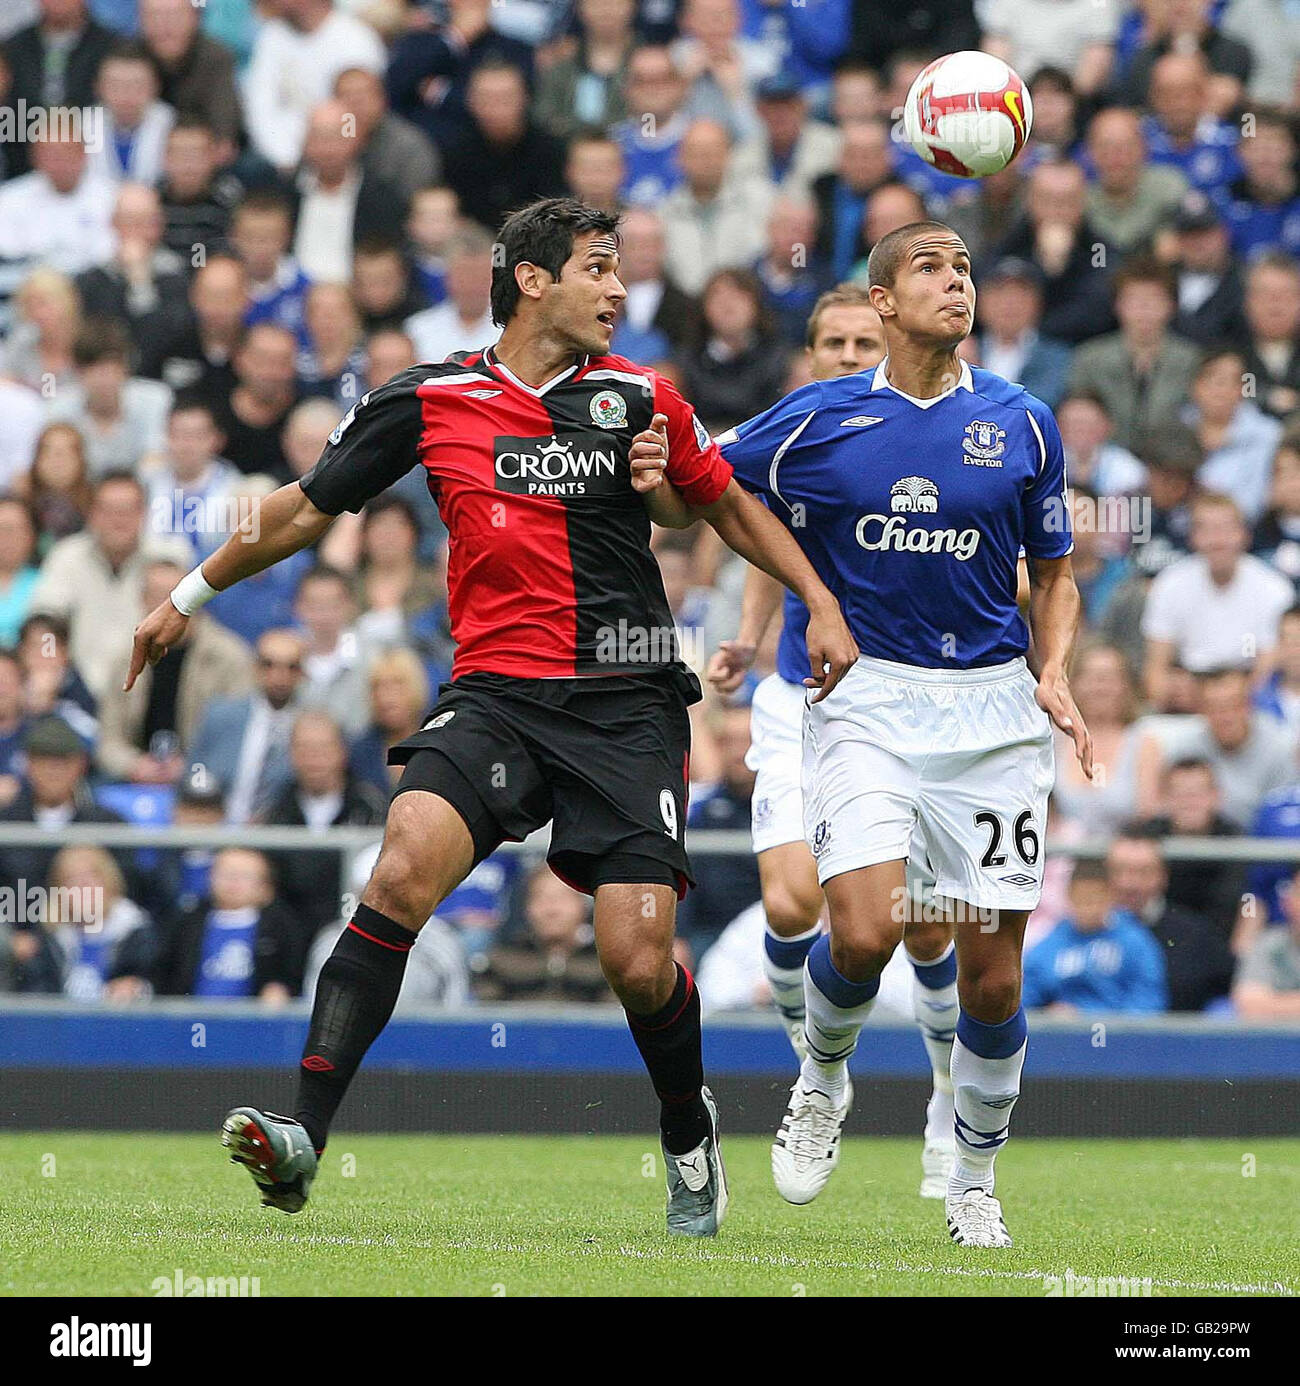 Blackburn Rovers' Roque Santa Cruz and Everton's Jack Rodwell battle for the ball during the Barclays Premier League match at Goodison Park, Liverpool. Stock Photo